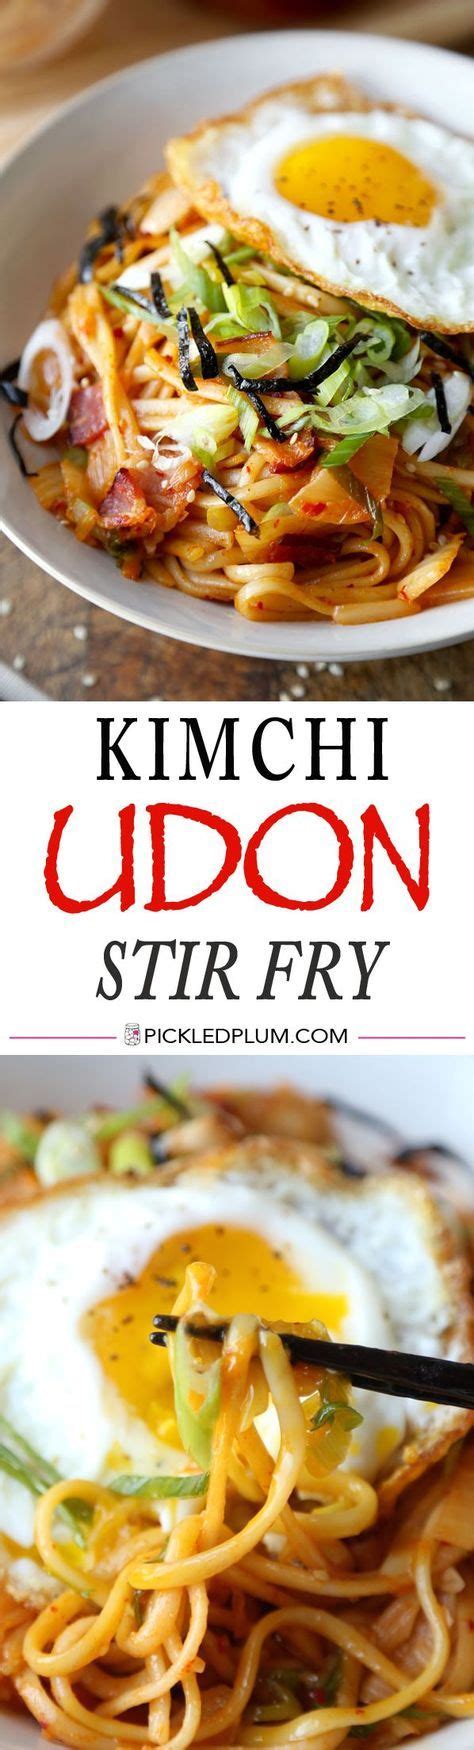 Kimchi Udon Stir Fry Pickled Plum Food And Drinks Recipe Food